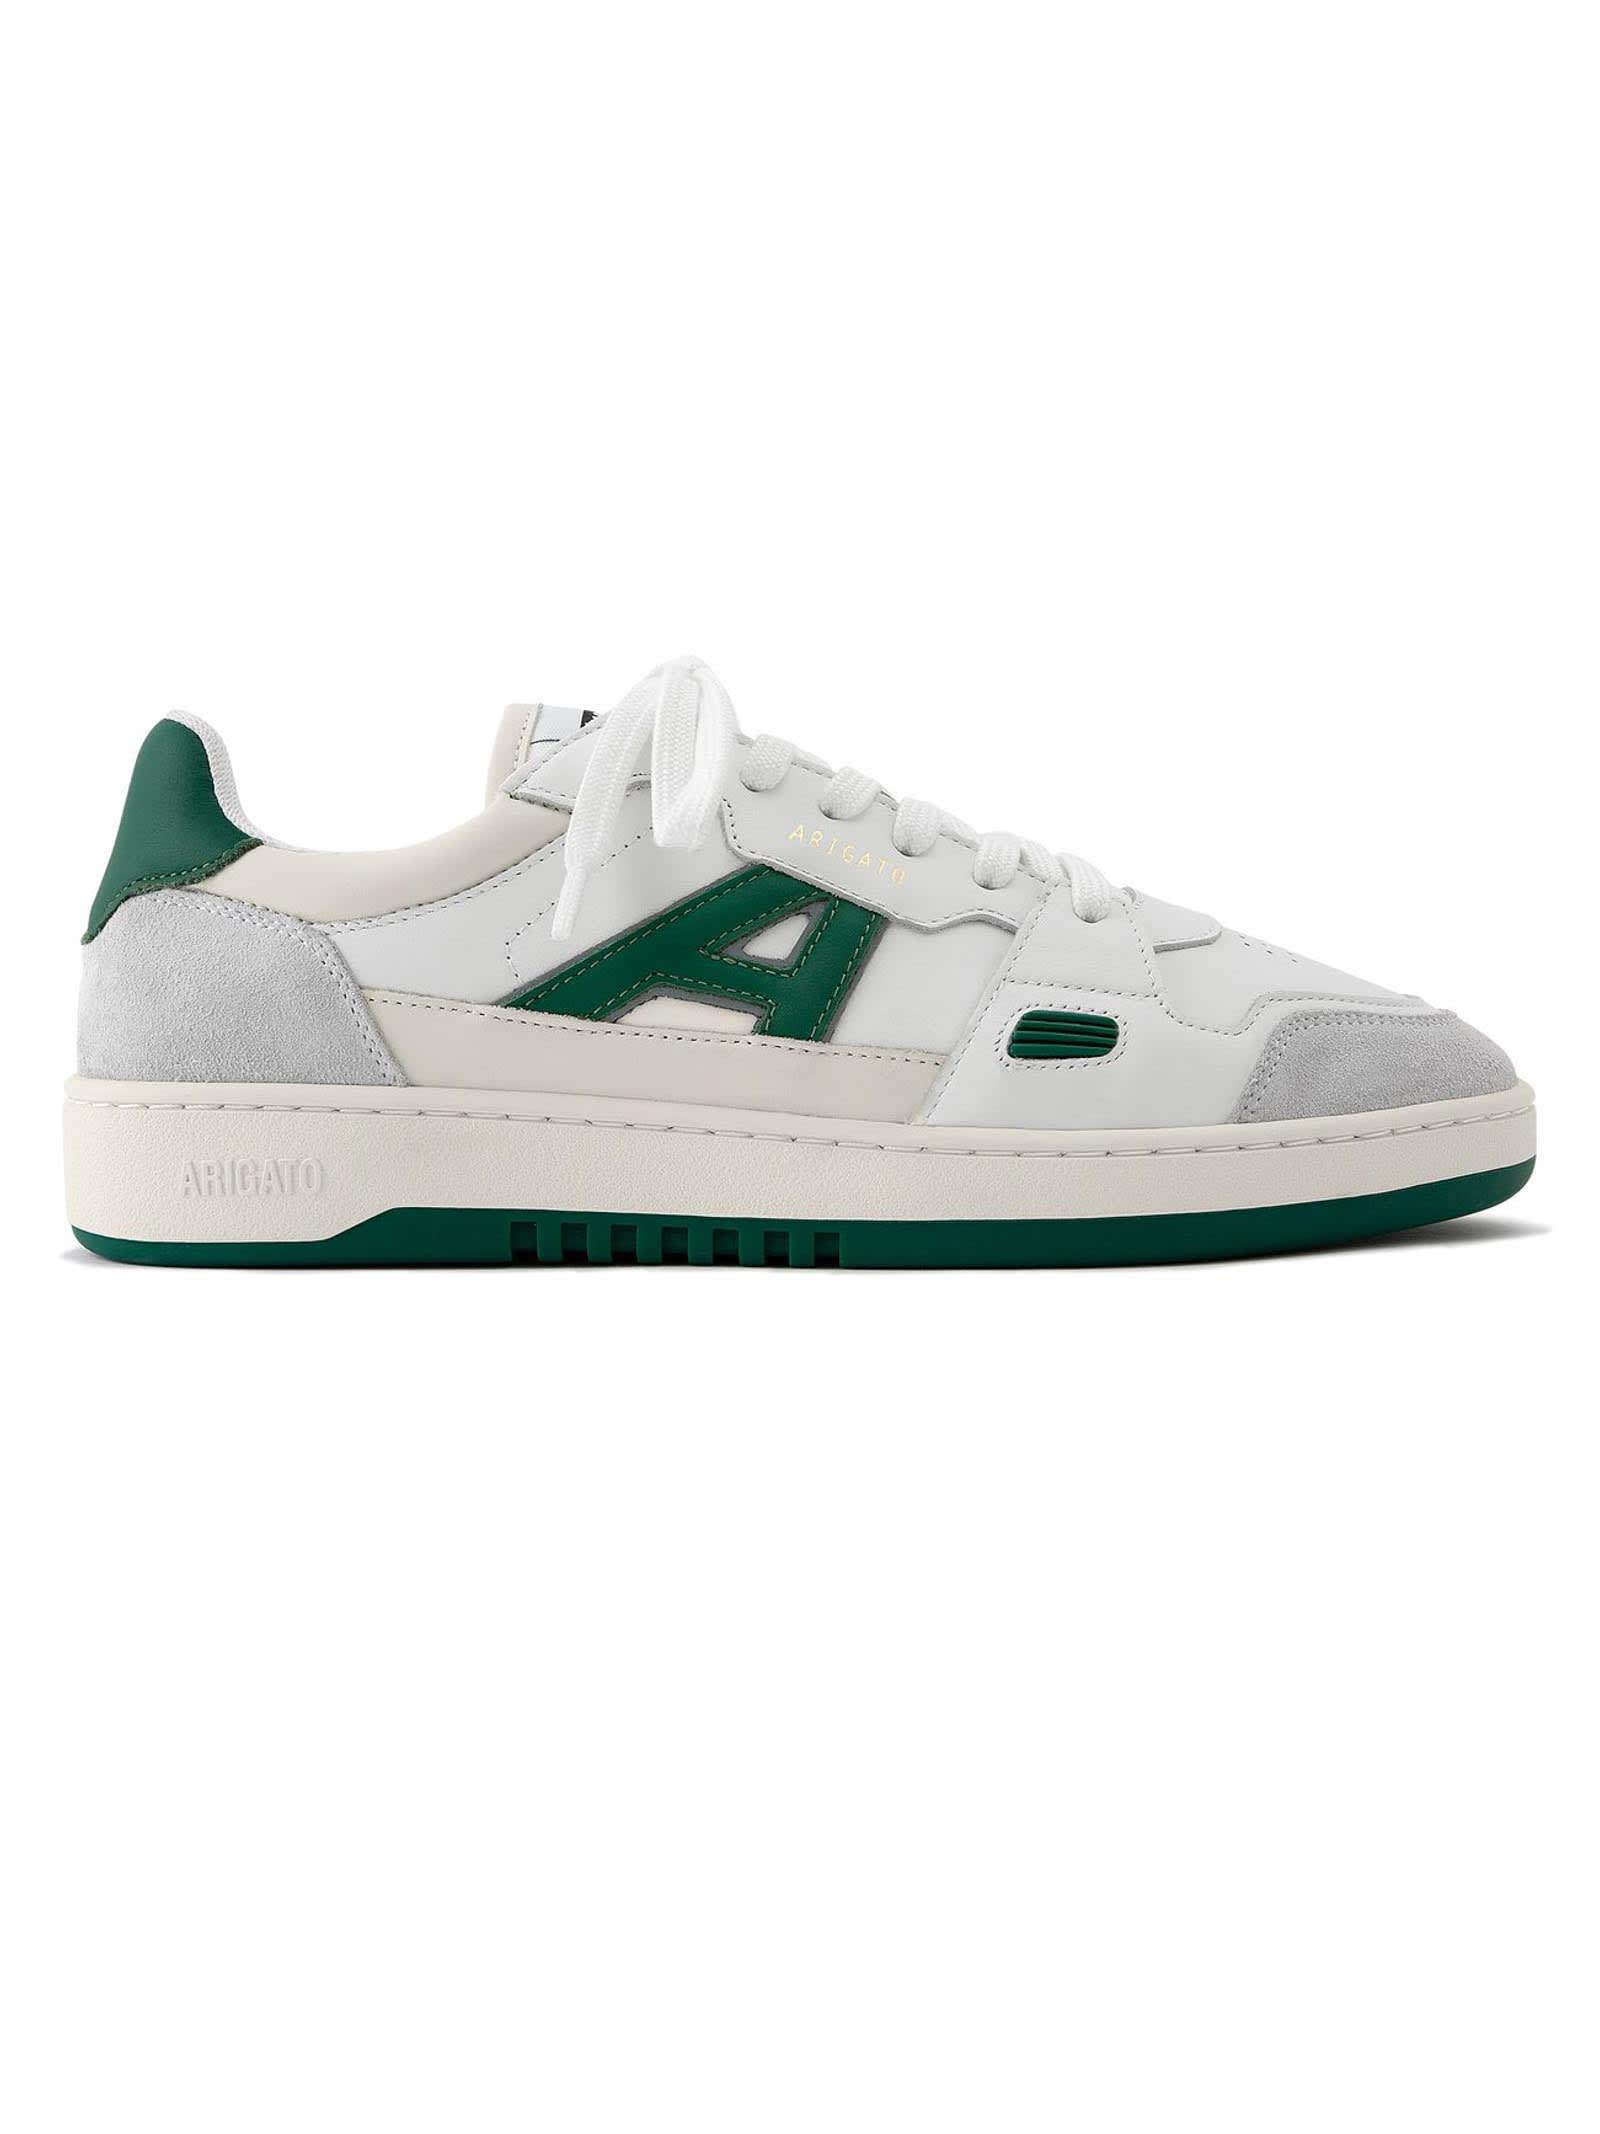 Axel Arigato White And Green A-dice Leather Sneakers